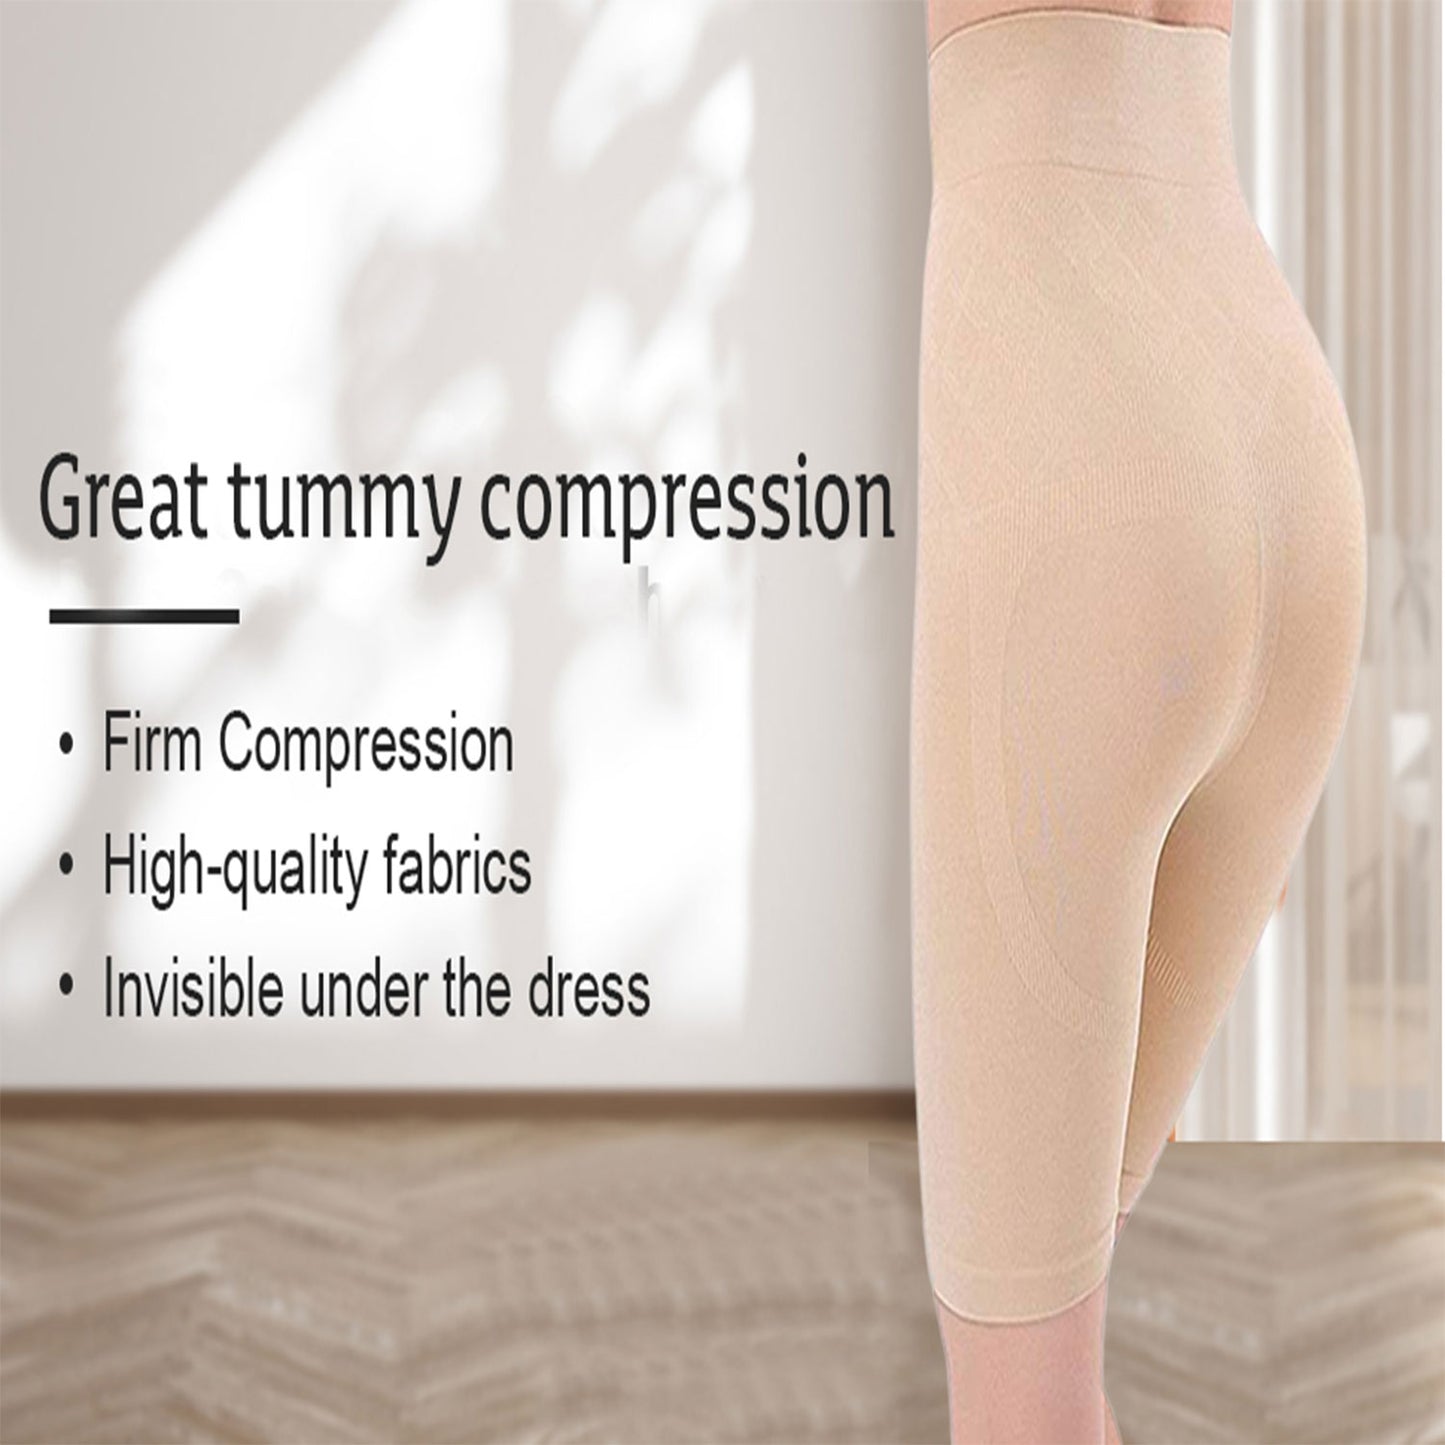 Buy Tummy And Hip Lift Pants Online At Cheap Price In India – coshapelady